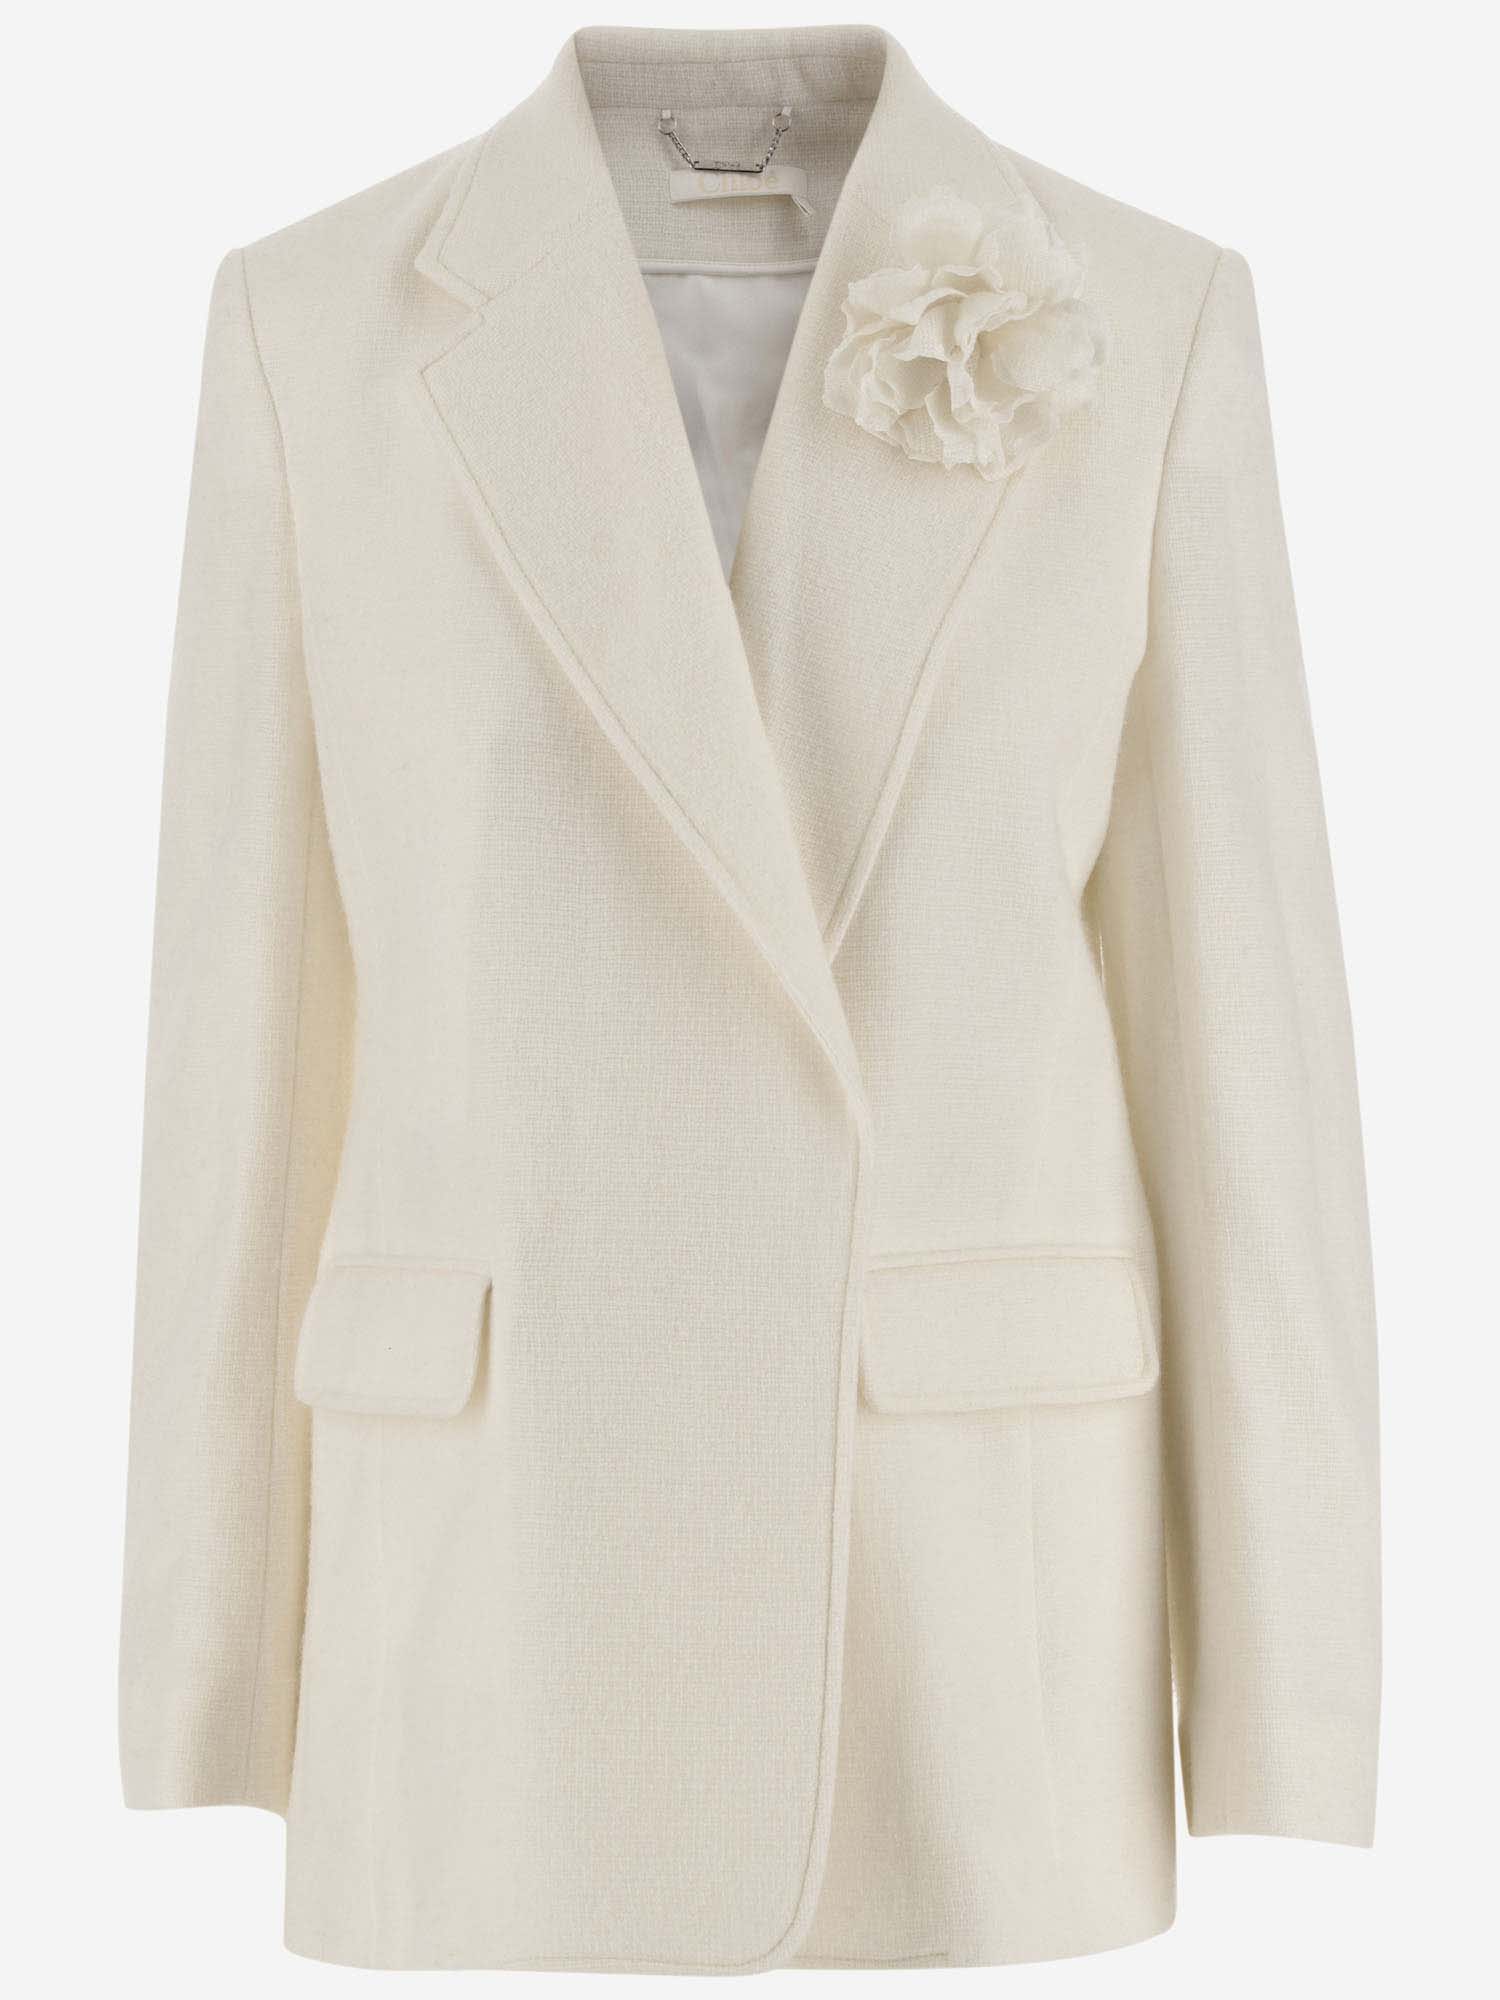 Chloé Wool And Cashmere Blend Jacket